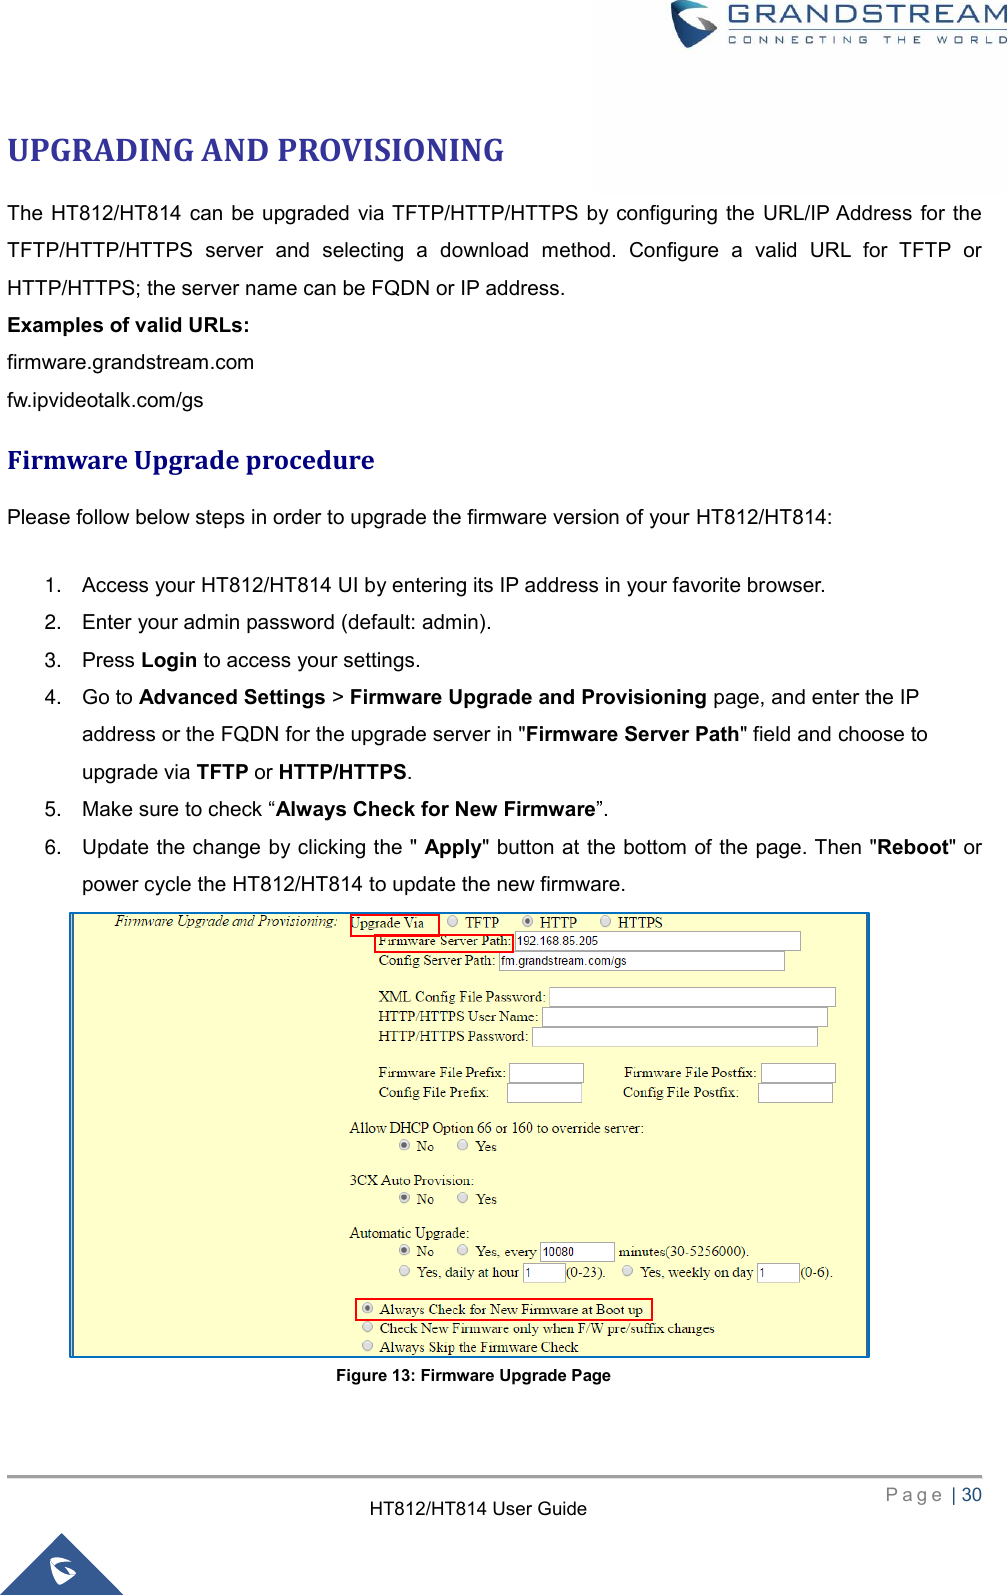     P a g e  | 30        HT812/HT814 User Guide  UPGRADING AND PROVISIONING The  HT812/HT814 can be upgraded  via TFTP/HTTP/HTTPS by configuring the  URL/IP Address for  the TFTP/HTTP/HTTPS  server  and  selecting  a  download  method.  Configure  a  valid  URL  for  TFTP  or HTTP/HTTPS; the server name can be FQDN or IP address. Examples of valid URLs: firmware.grandstream.com fw.ipvideotalk.com/gs Firmware Upgrade procedure Please follow below steps in order to upgrade the firmware version of your HT812/HT814:  1. Access your HT812/HT814 UI by entering its IP address in your favorite browser. 2. Enter your admin password (default: admin). 3. Press Login to access your settings. 4. Go to Advanced Settings &gt; Firmware Upgrade and Provisioning page, and enter the IP address or the FQDN for the upgrade server in &quot;Firmware Server Path&quot; field and choose to upgrade via TFTP or HTTP/HTTPS. 5. Make sure to check “Always Check for New Firmware”. 6. Update the change by clicking the &quot; Apply&quot; button at the bottom of the page. Then &quot;Reboot&quot; or power cycle the HT812/HT814 to update the new firmware.               Figure 13: Firmware Upgrade Page 